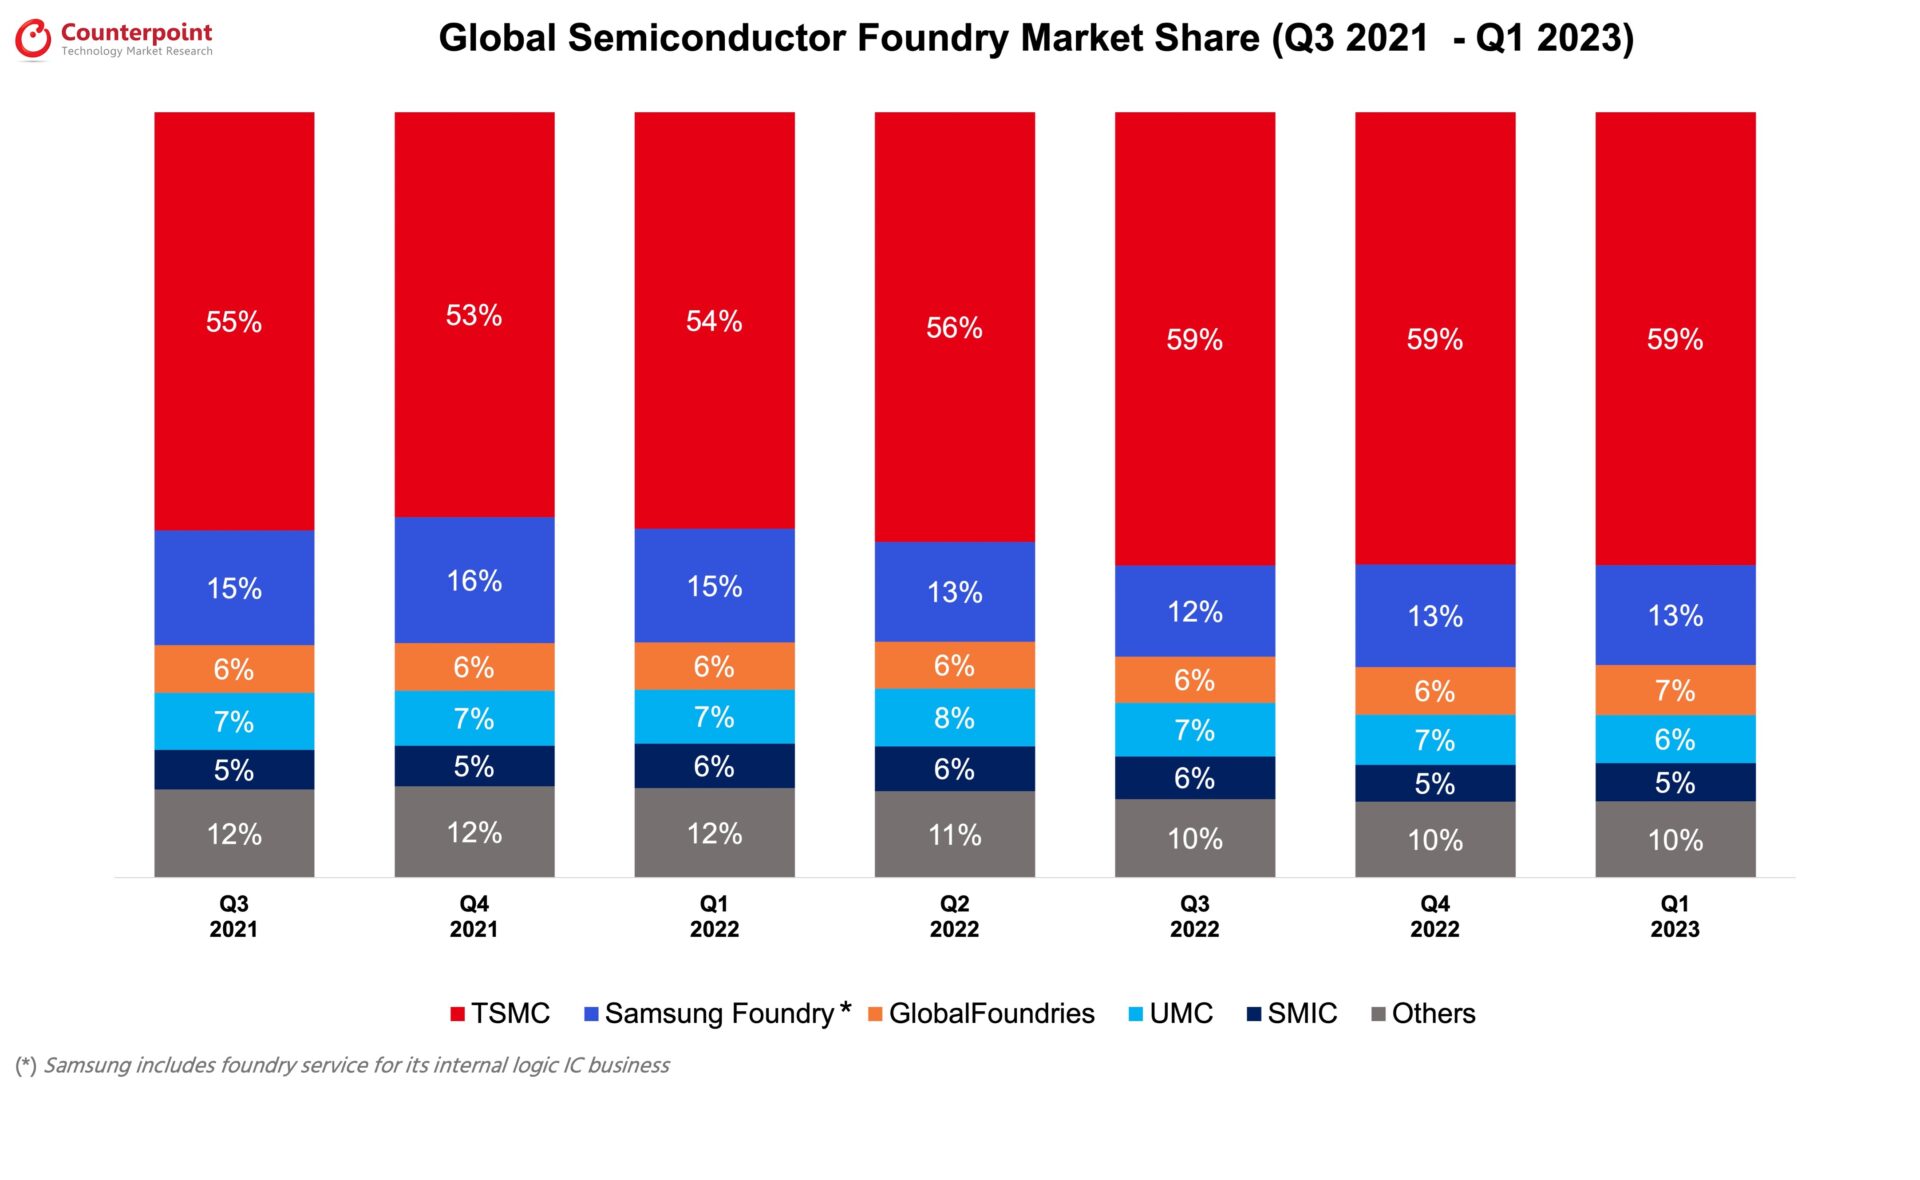 Global Semiconductor Foundry Market Share By Quarter